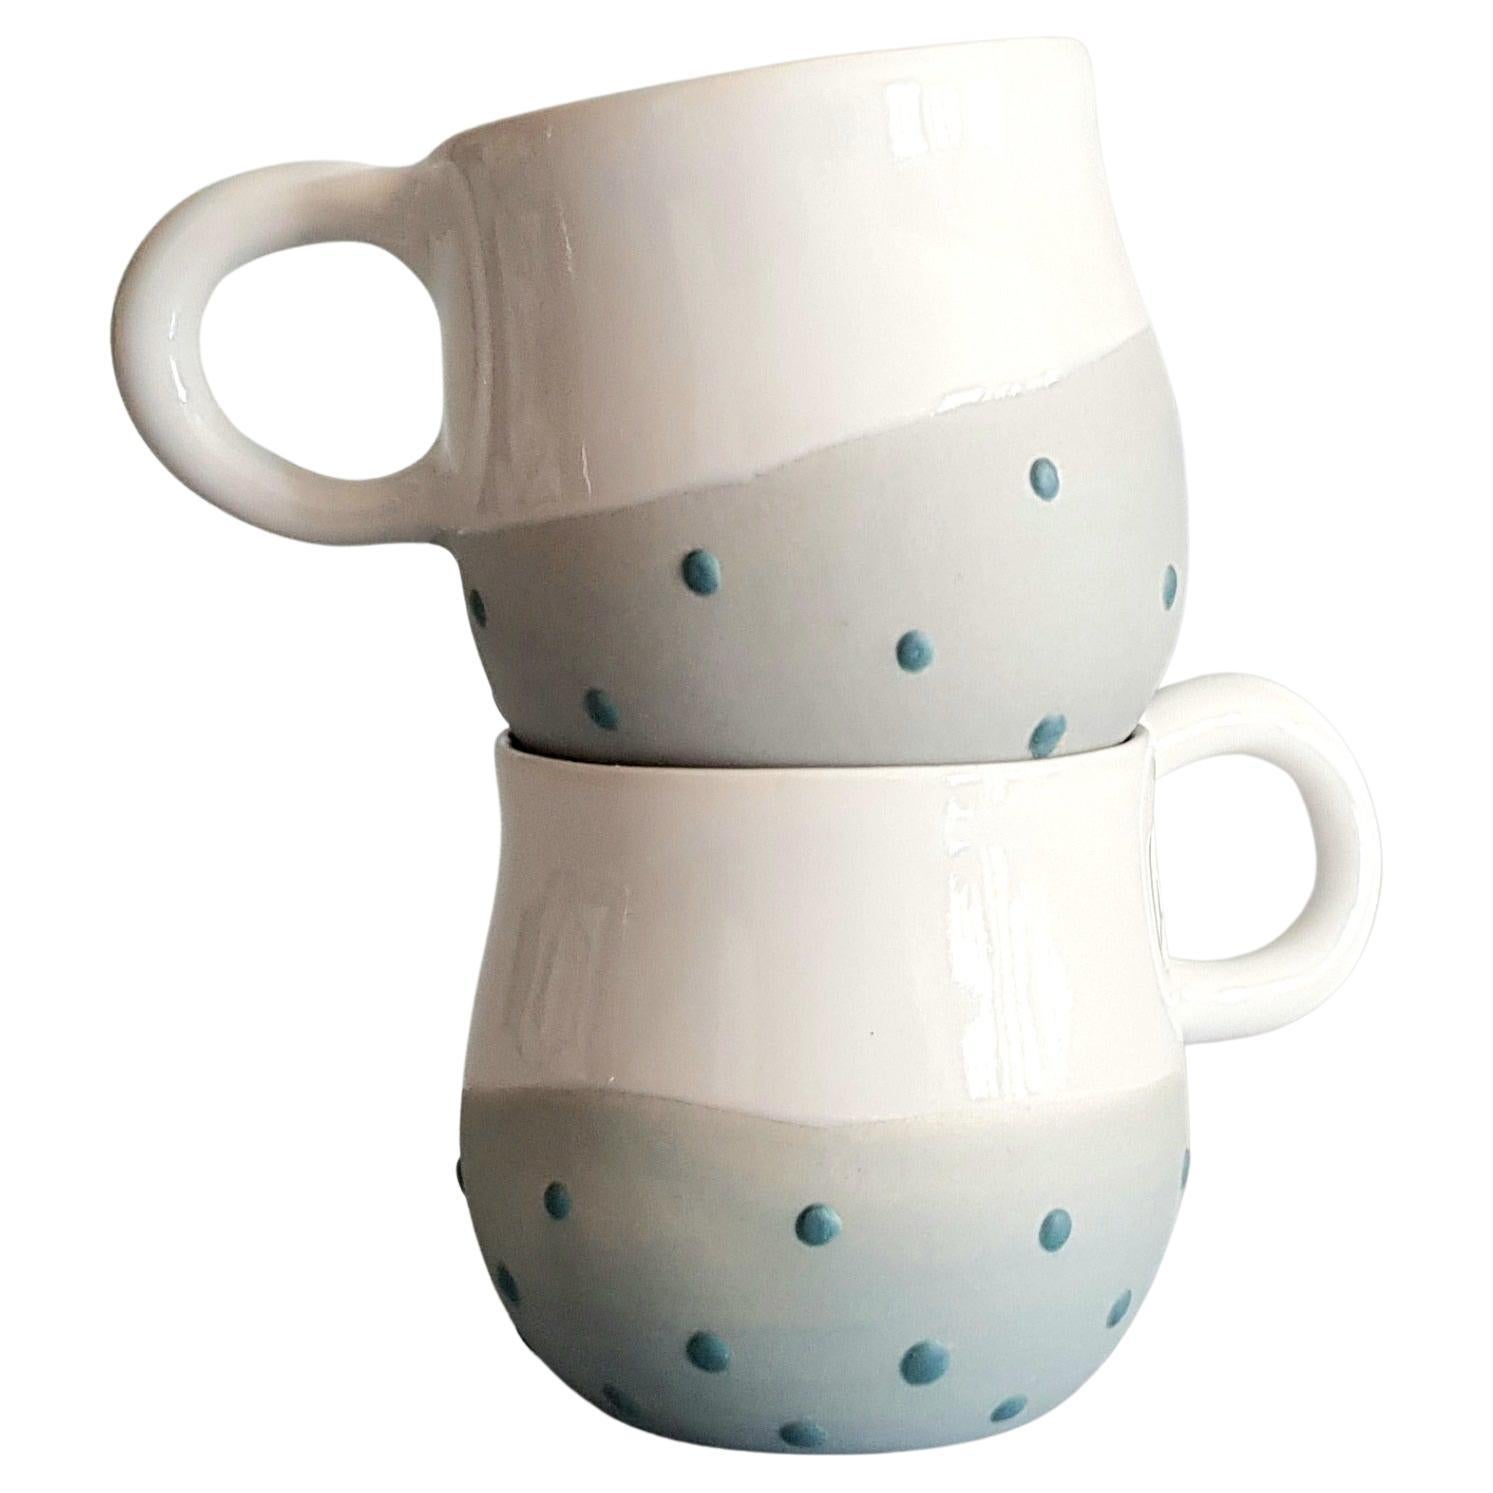 Amélie Handcrafted Milk Jug, Handmade in Italy 2021, Choose Size/Colours